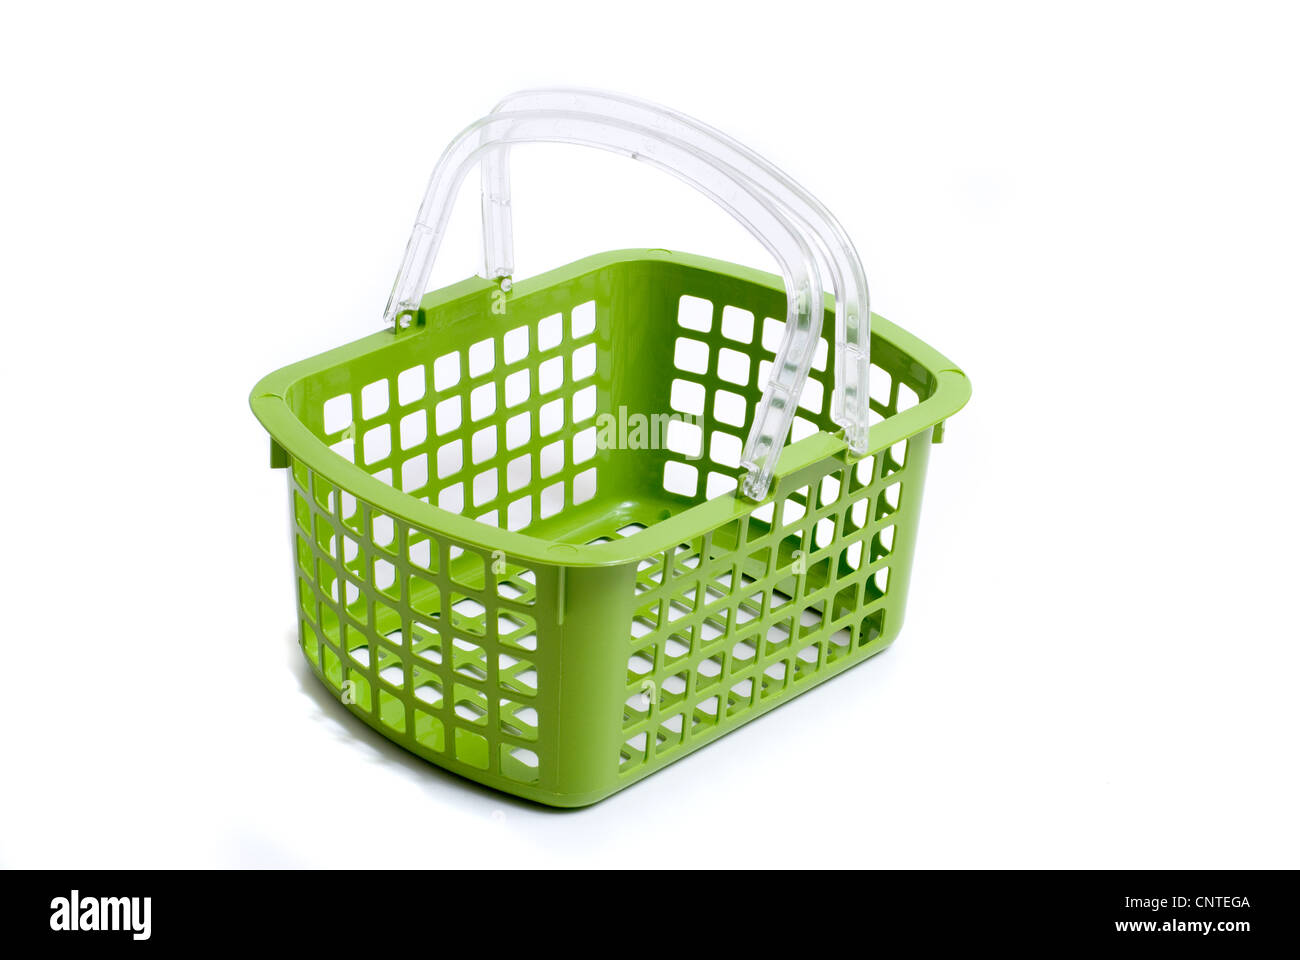 Empty Shopping basket cut out. Stock Photo